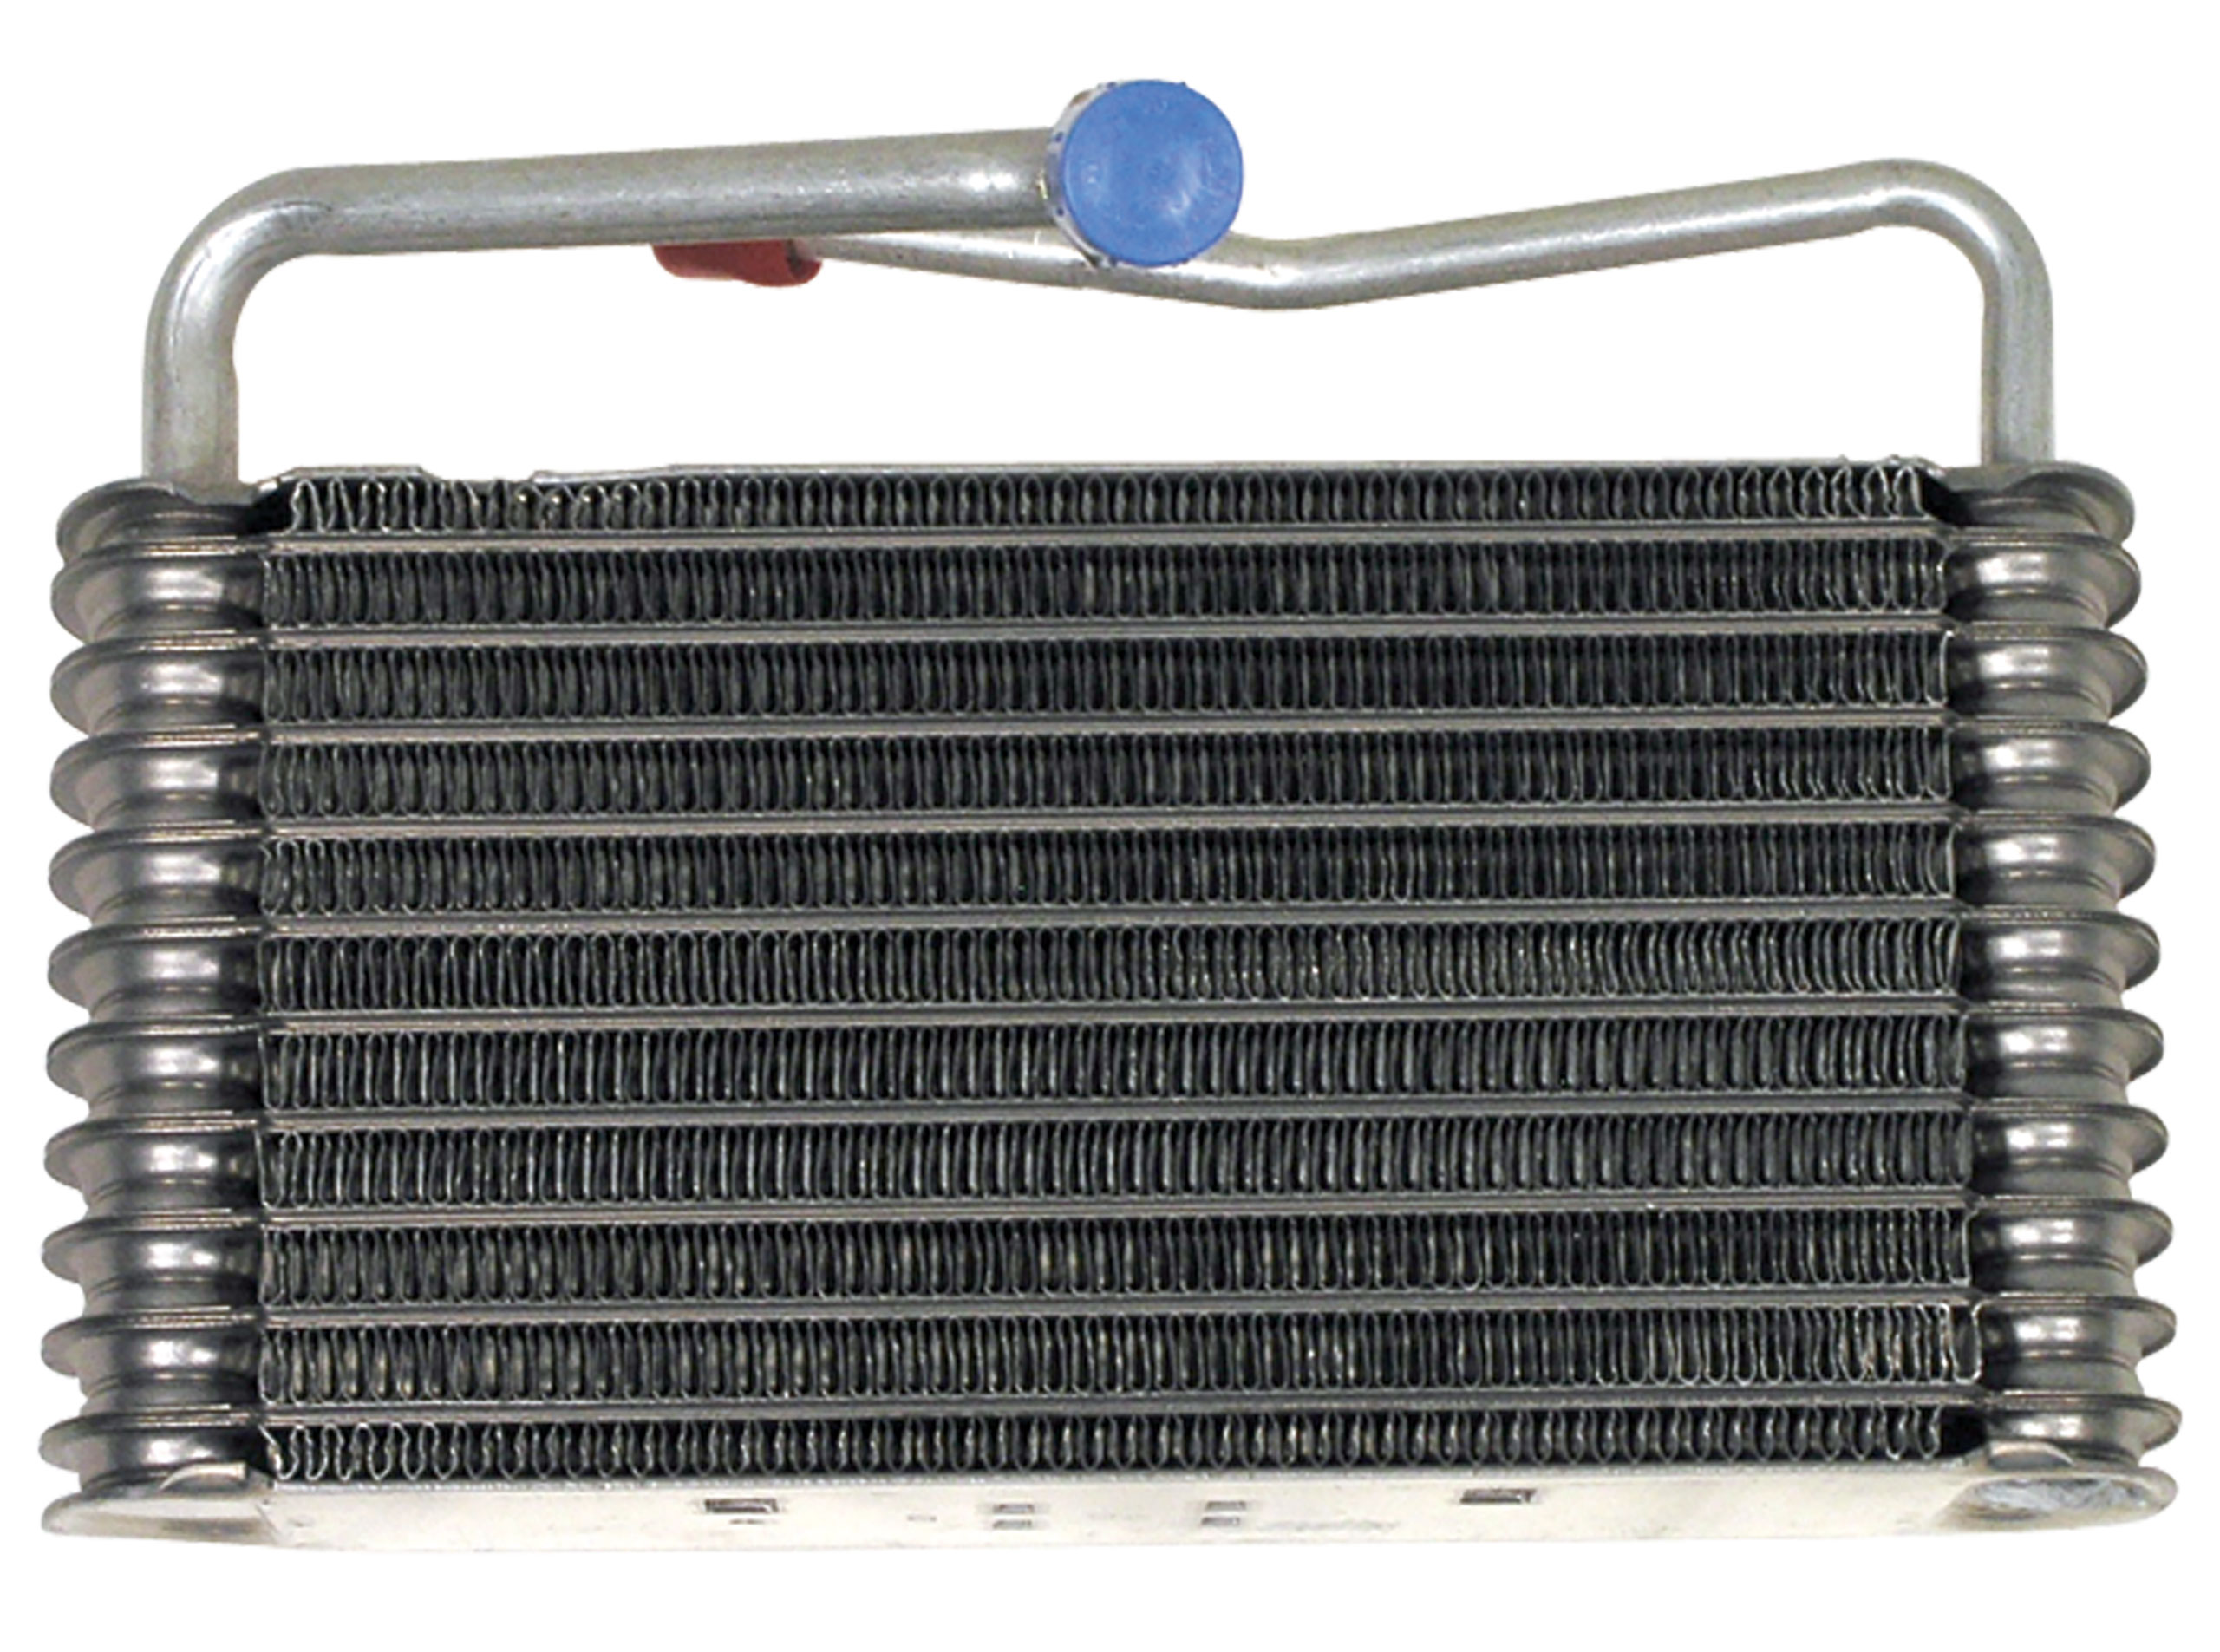 C3 1977-1979 Chevrolet Corvette Air Conditioning Evaporator. 77L - Old Air Products